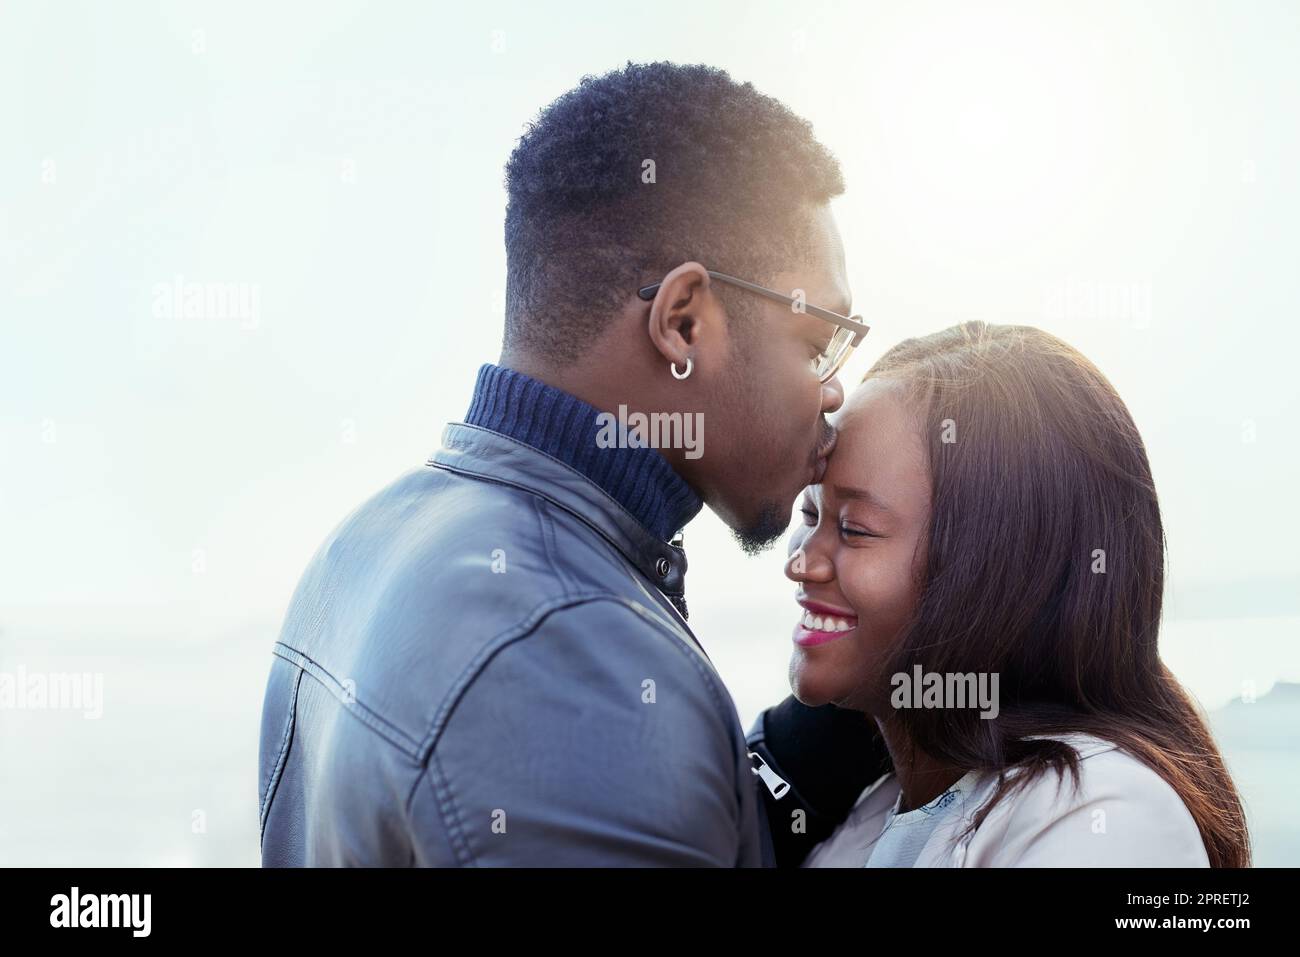 My life is nothing without you. an affectionate young couple bonding together outdoors. Stock Photo